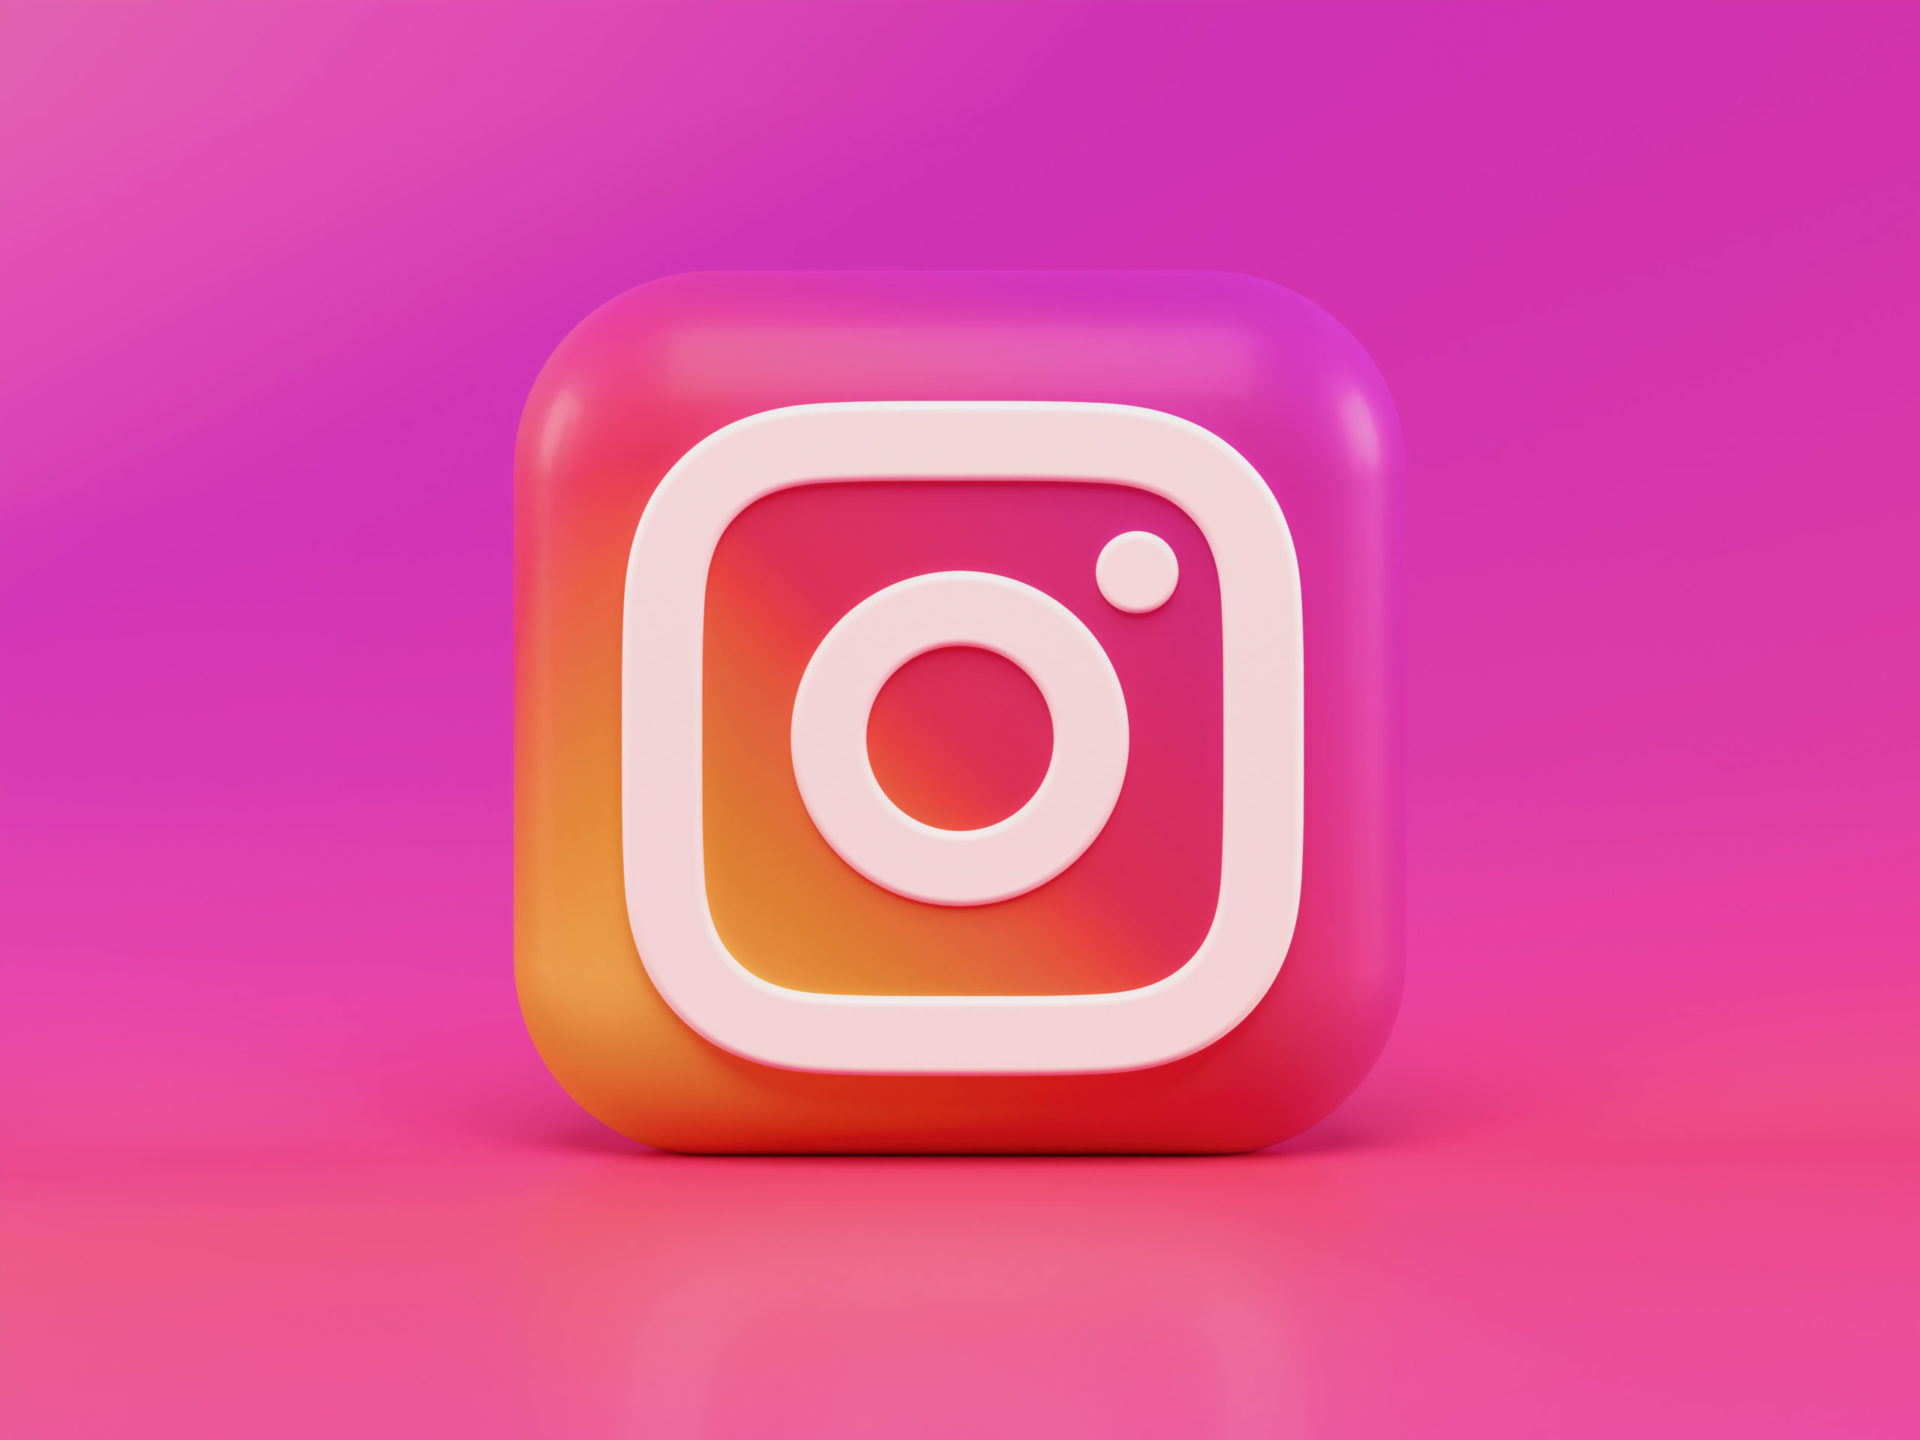 A 3-D rendering of the instagram logo on a bright purple and purple gradient background